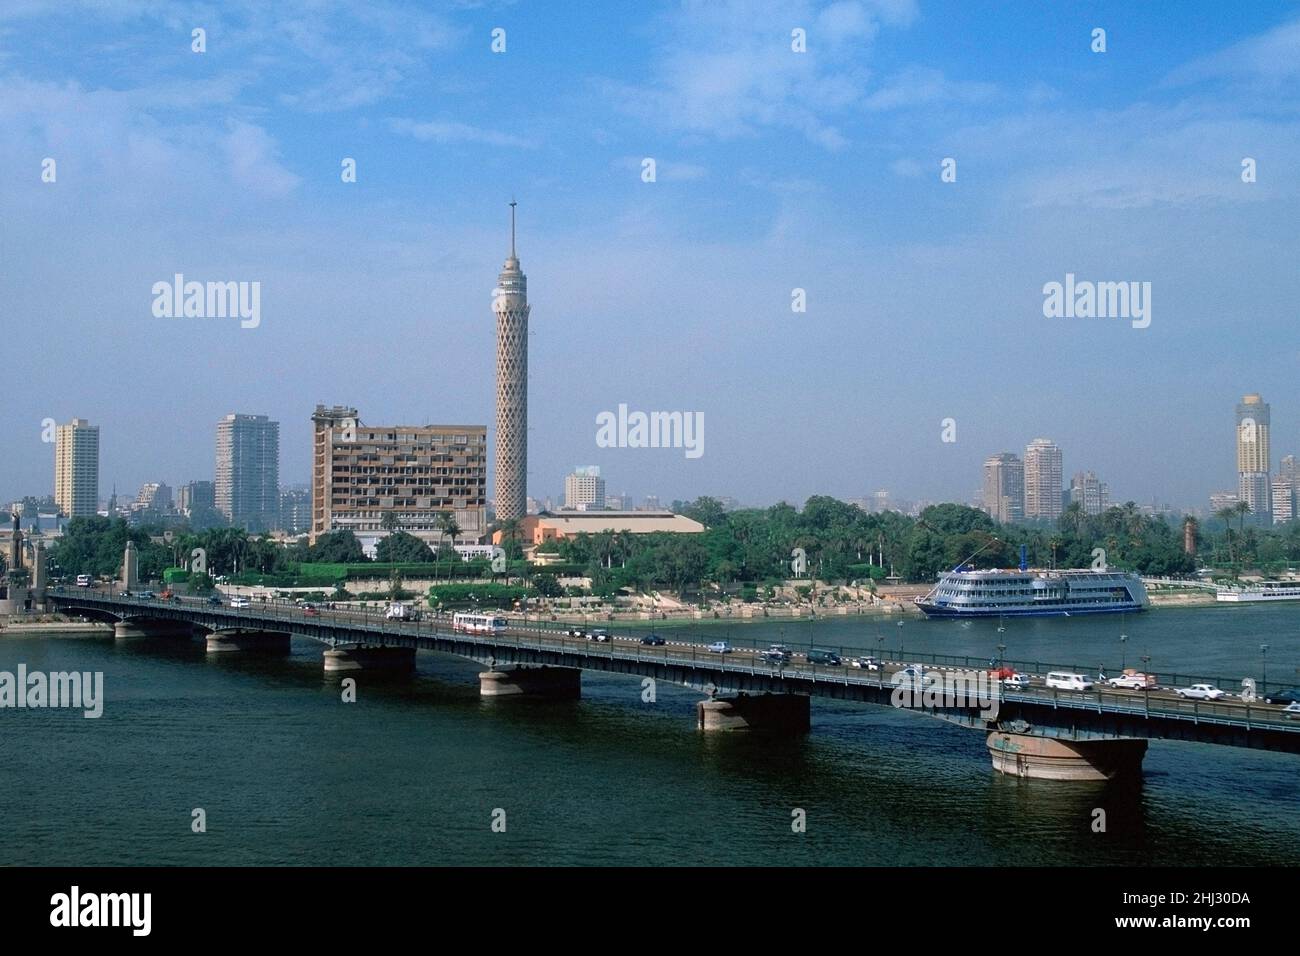 The Nile River and Cairo Tower, Cairo, Egypt Stock Photo